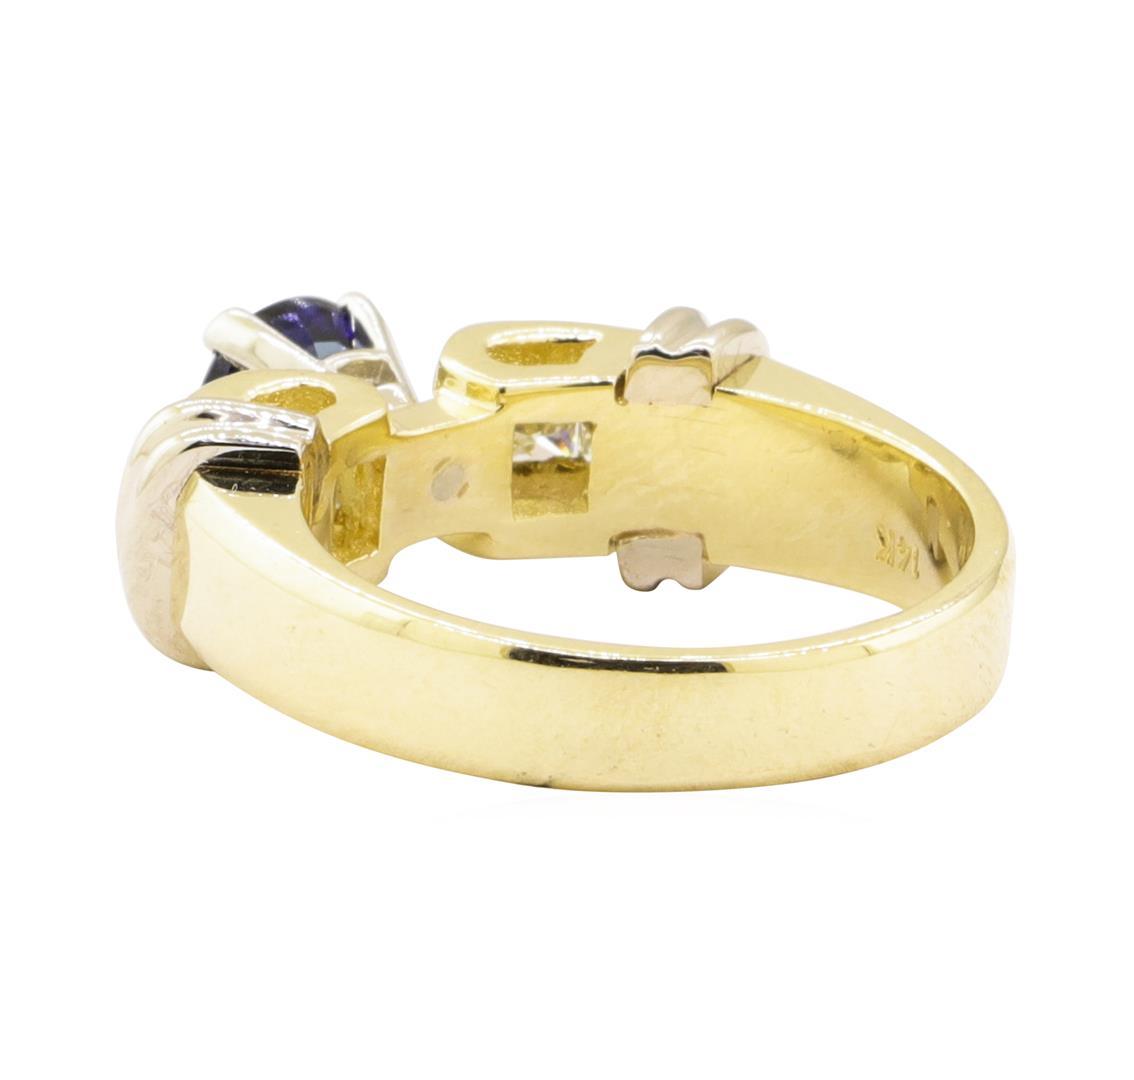 1.67 ctw Blue Sapphire And Diamond Ring - 14KT Yellow And White Gold